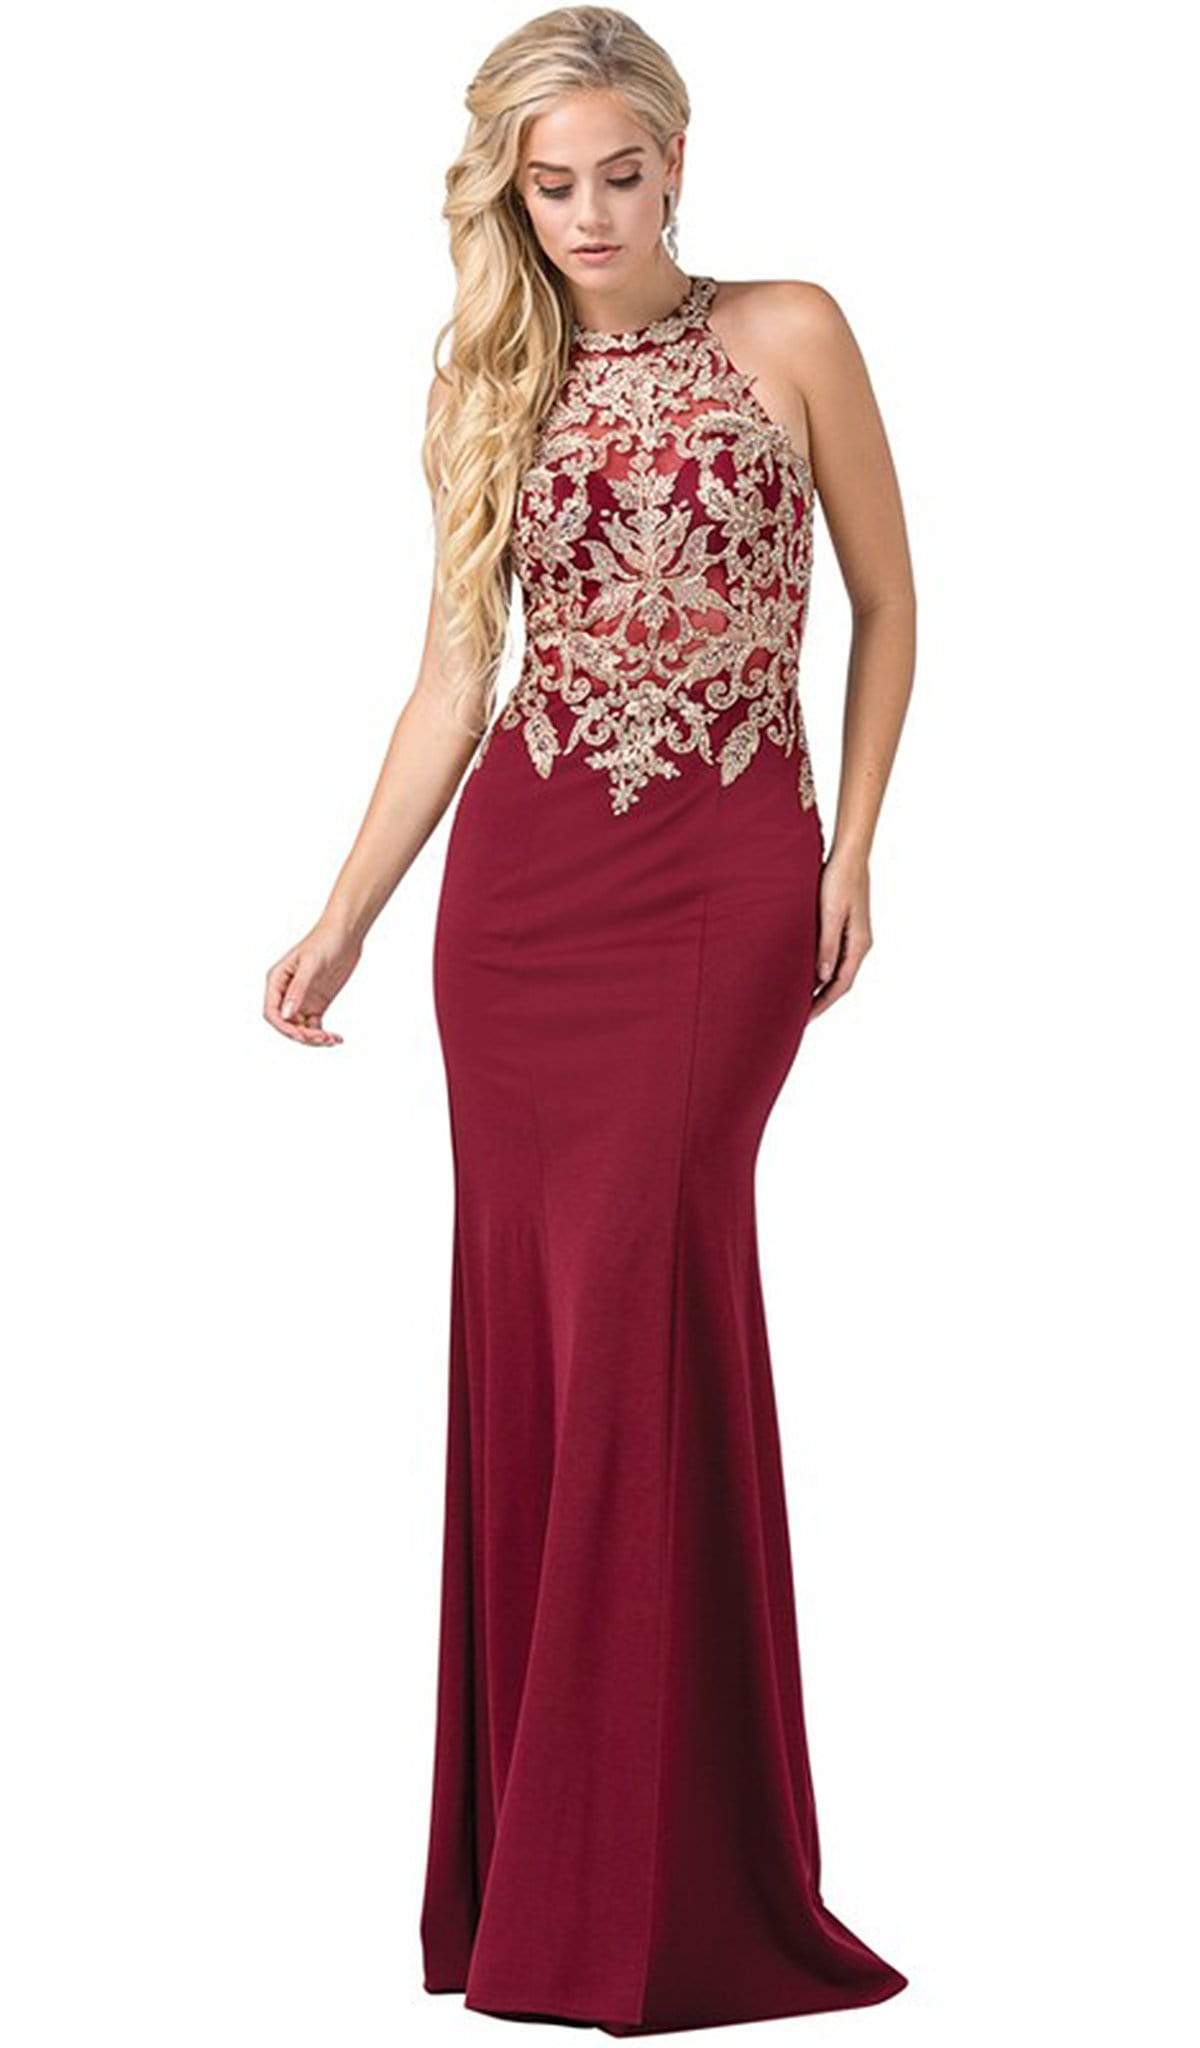 Dancing Queen - 2555 Embroidered Halter Long Trumpet Gown